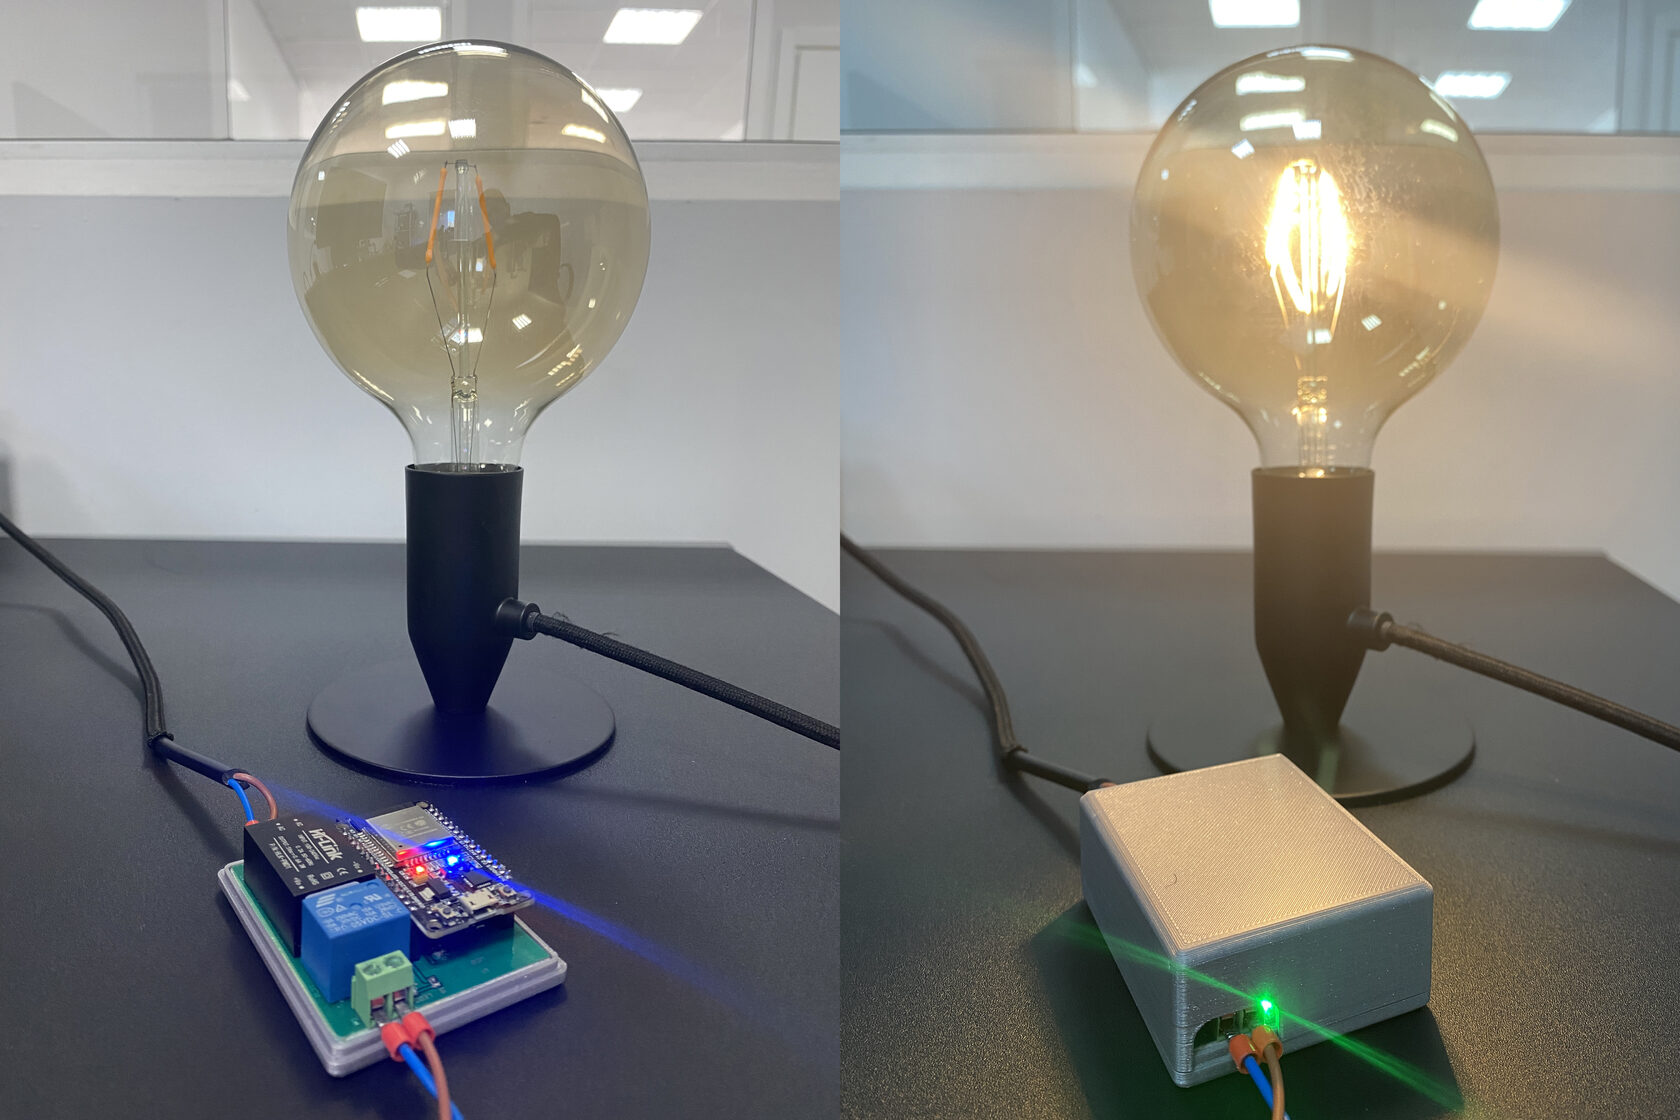 WiFi relay on PCB with table lamp connected